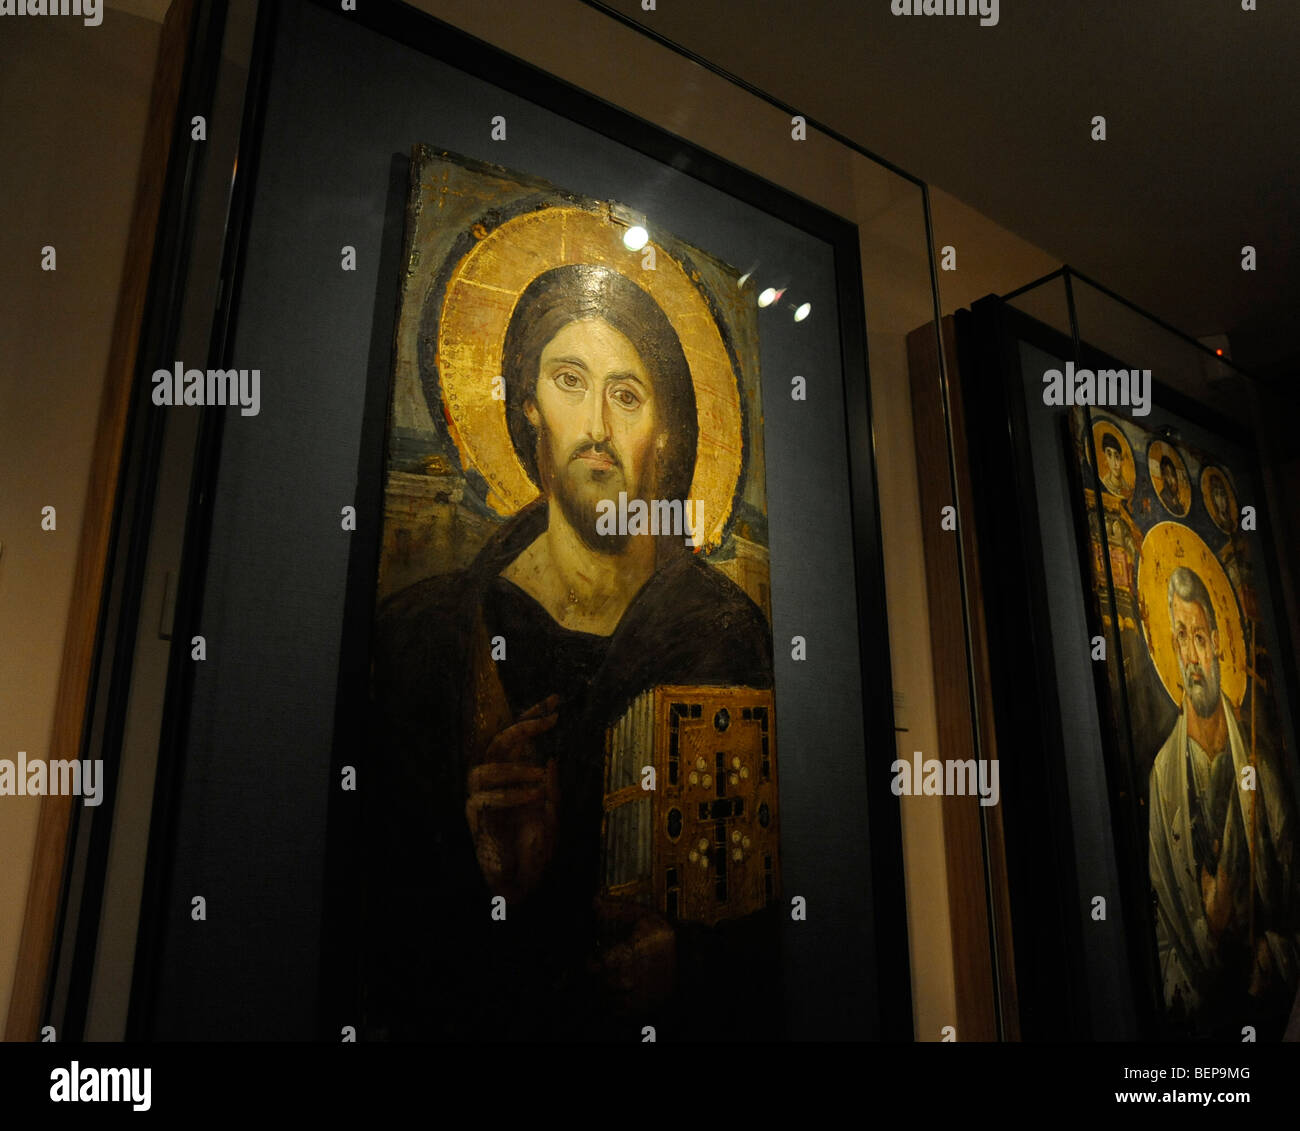 the-christ-pantokrator-icon-dated-5th-century-in-the-museum-in-st-BEP9MG.jpg